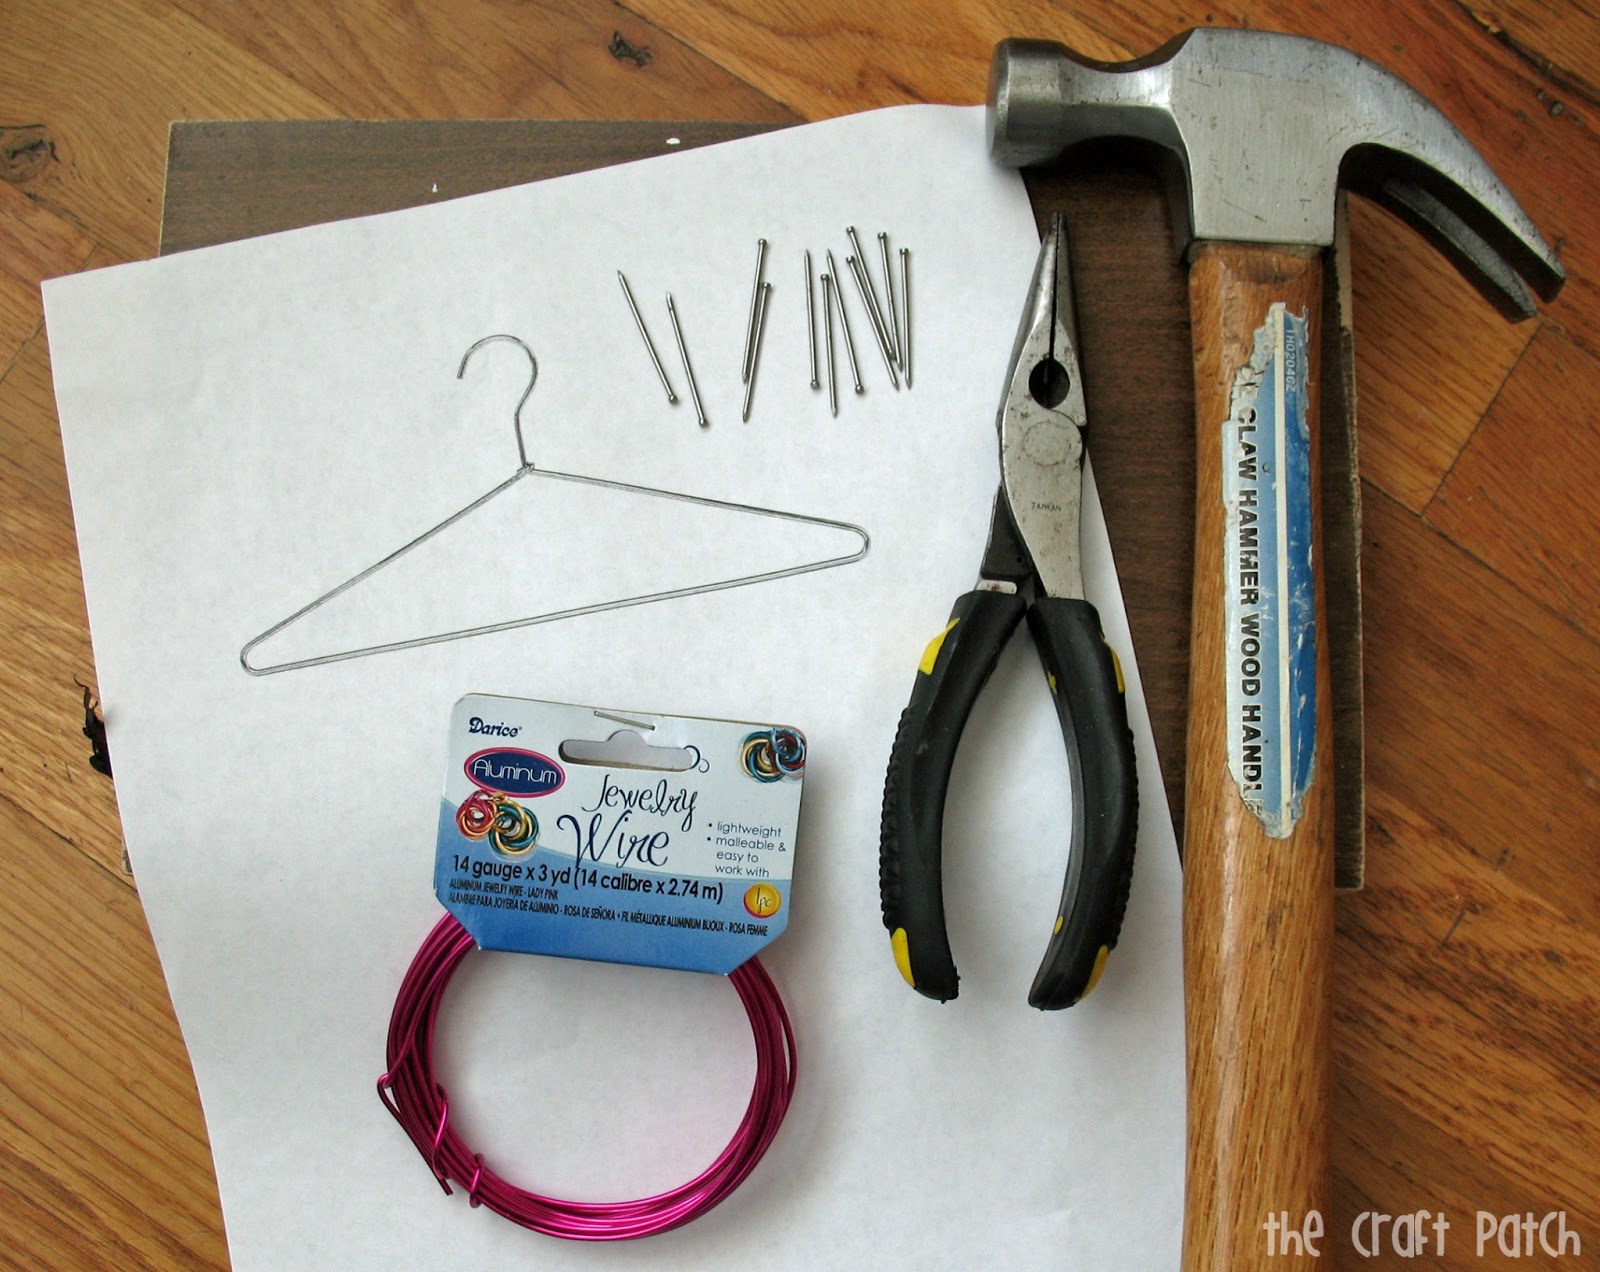 DIY, How to make baby clothes hanger at home